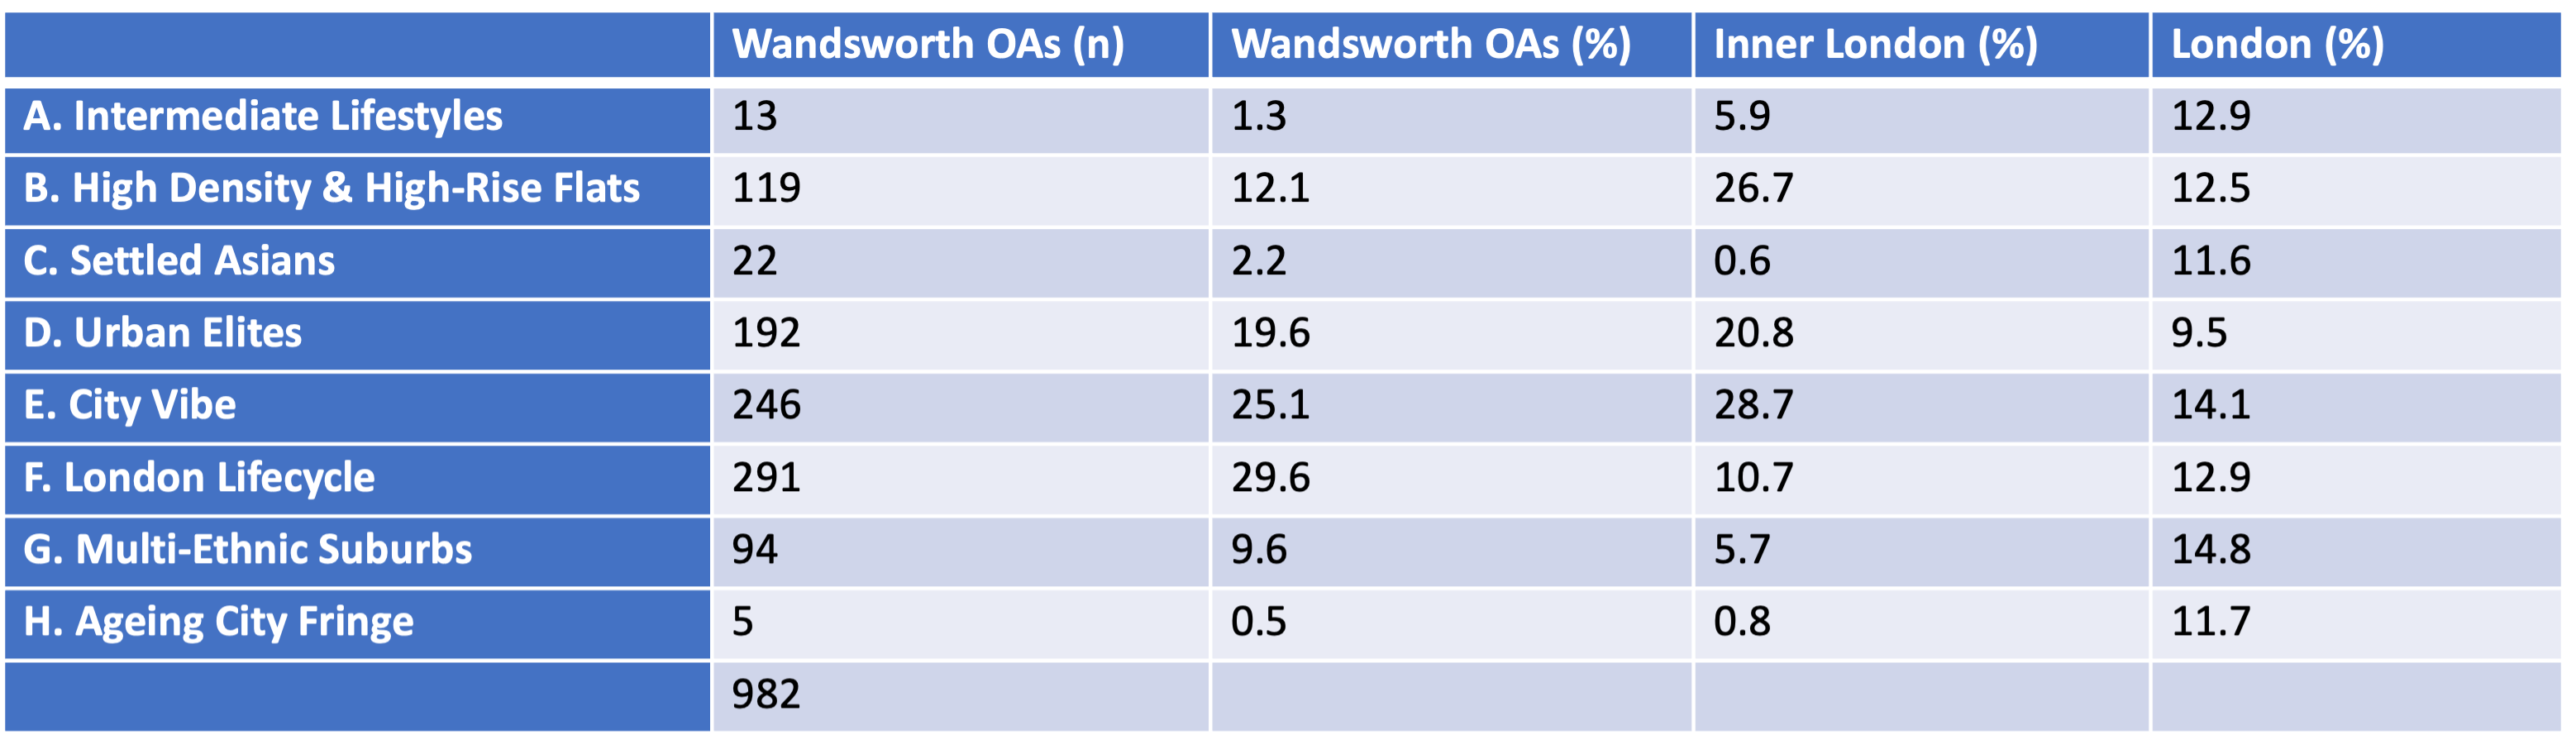 London Output Area Classification, based on 2011 Census variables